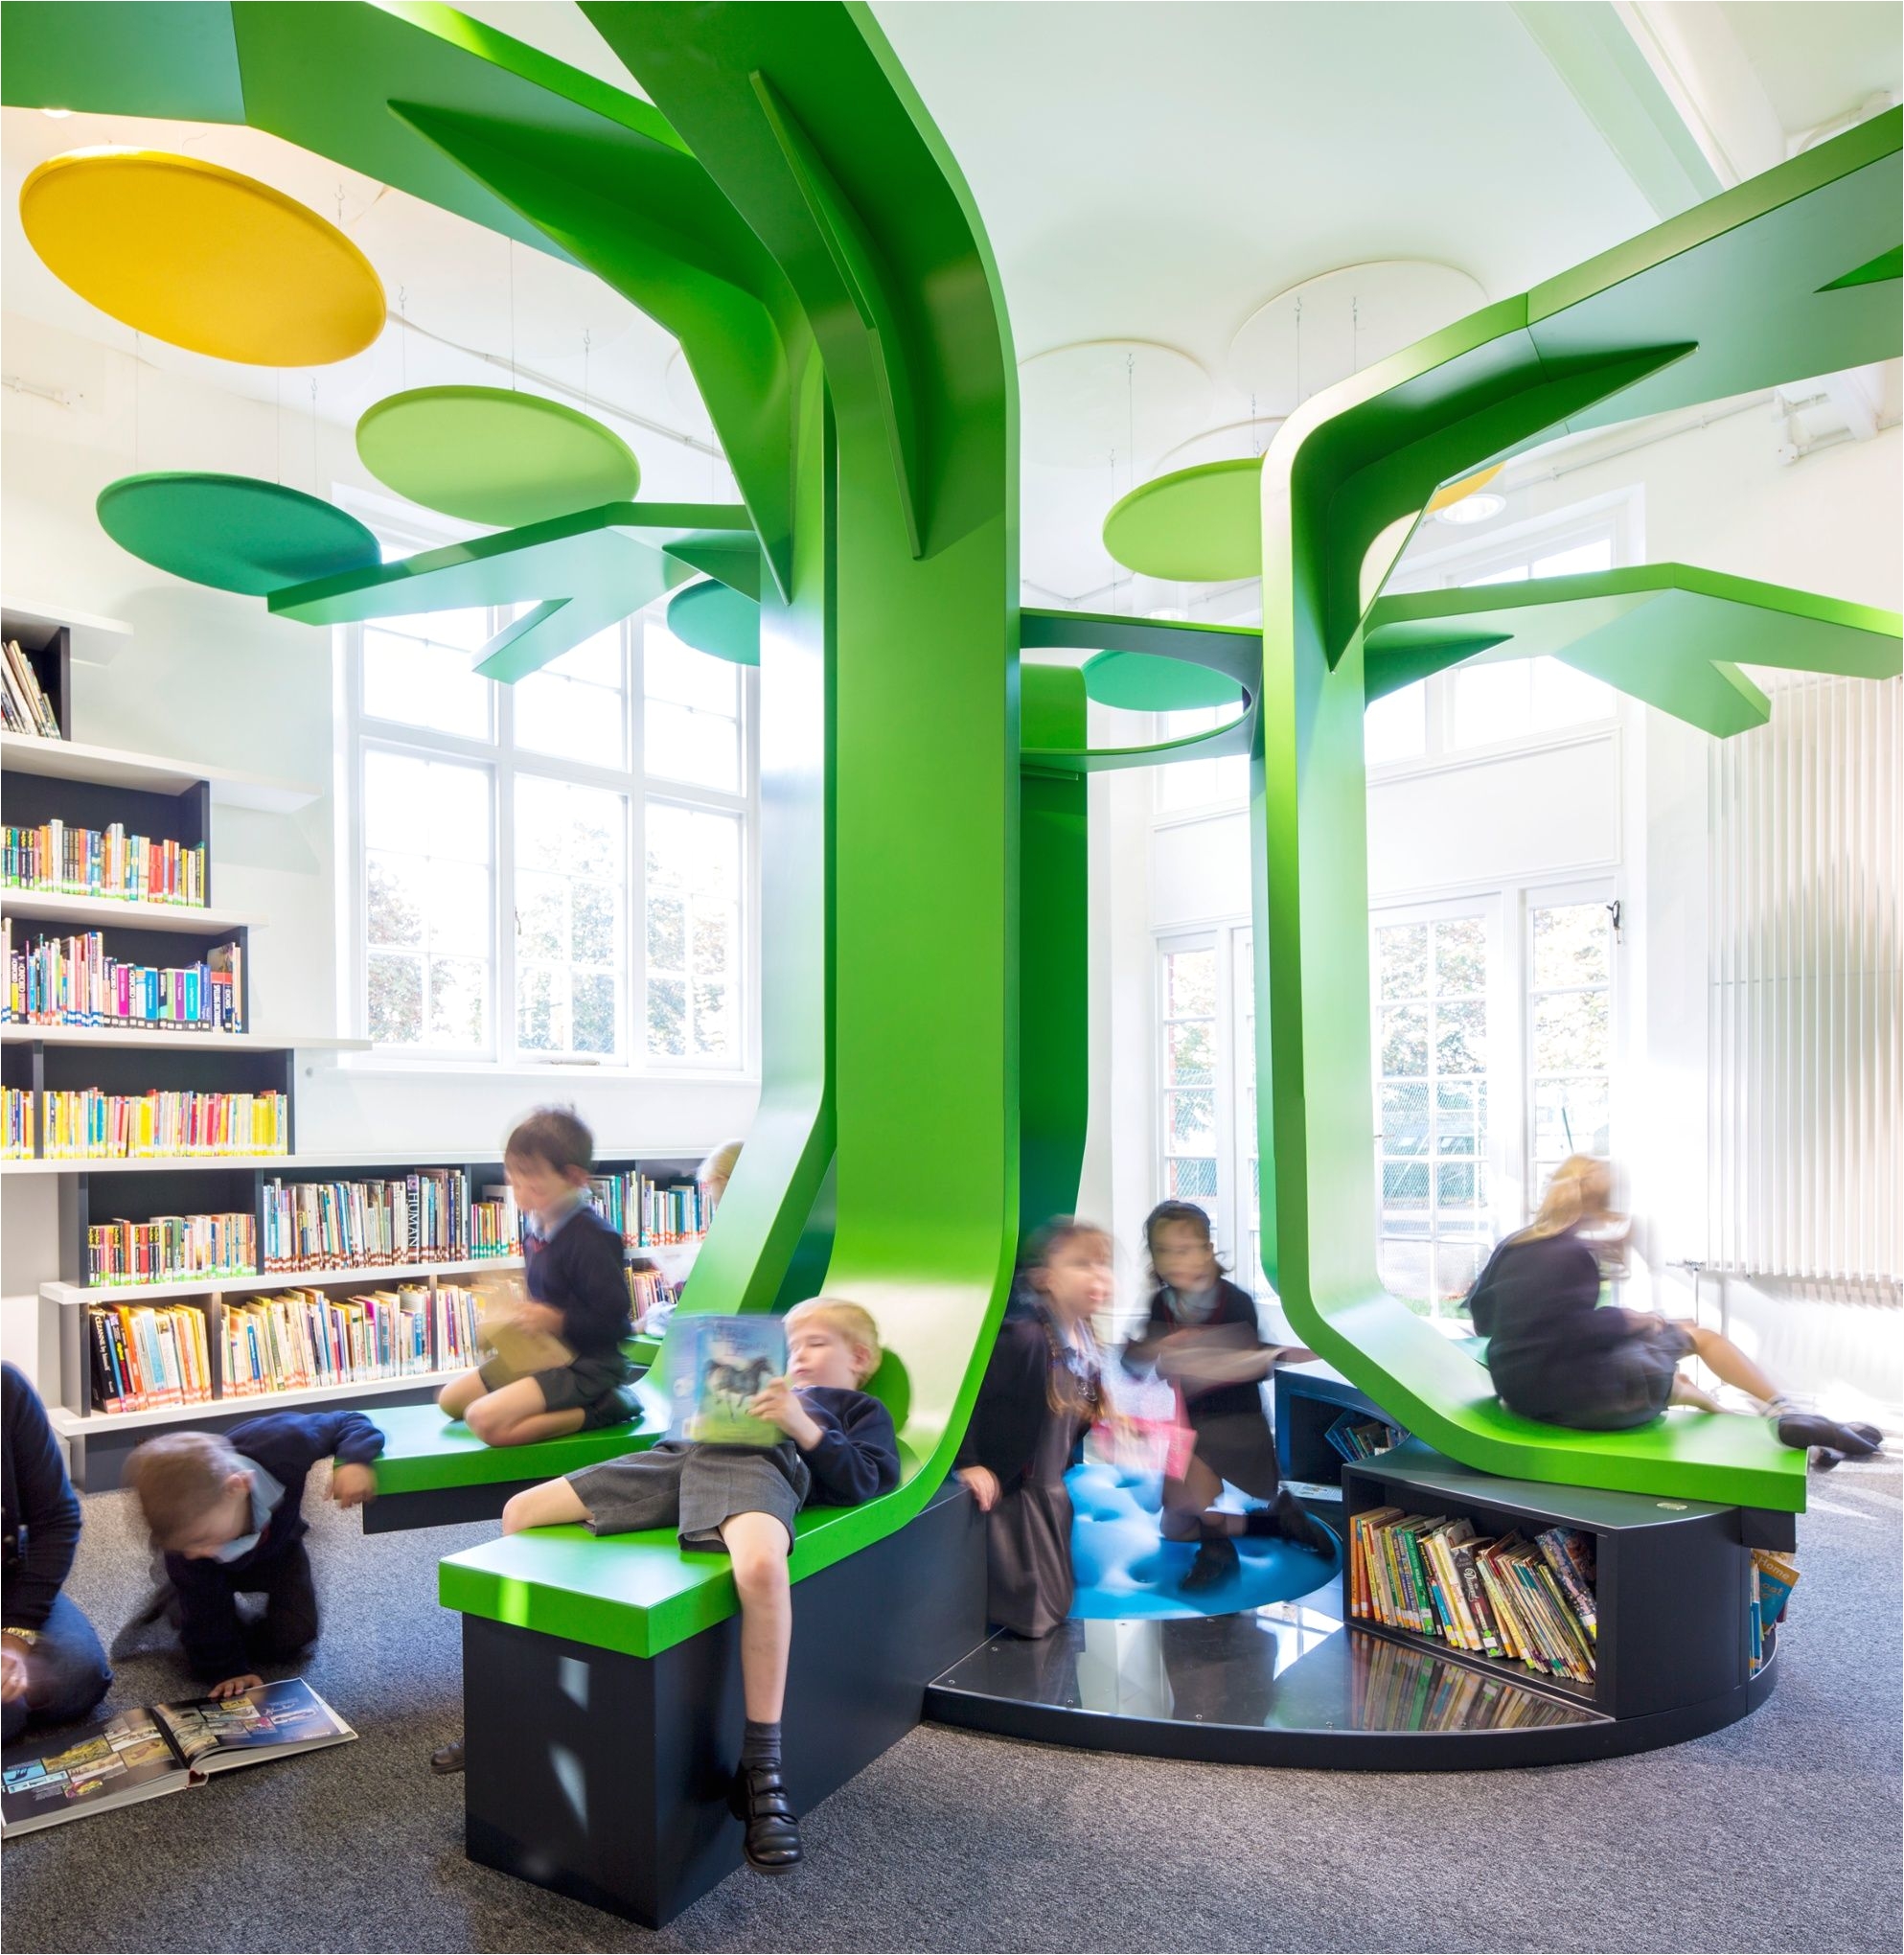 from a story garden in cornwall to hexagonal towers in los angeles we look at inventive spaces designed to get children excited about books